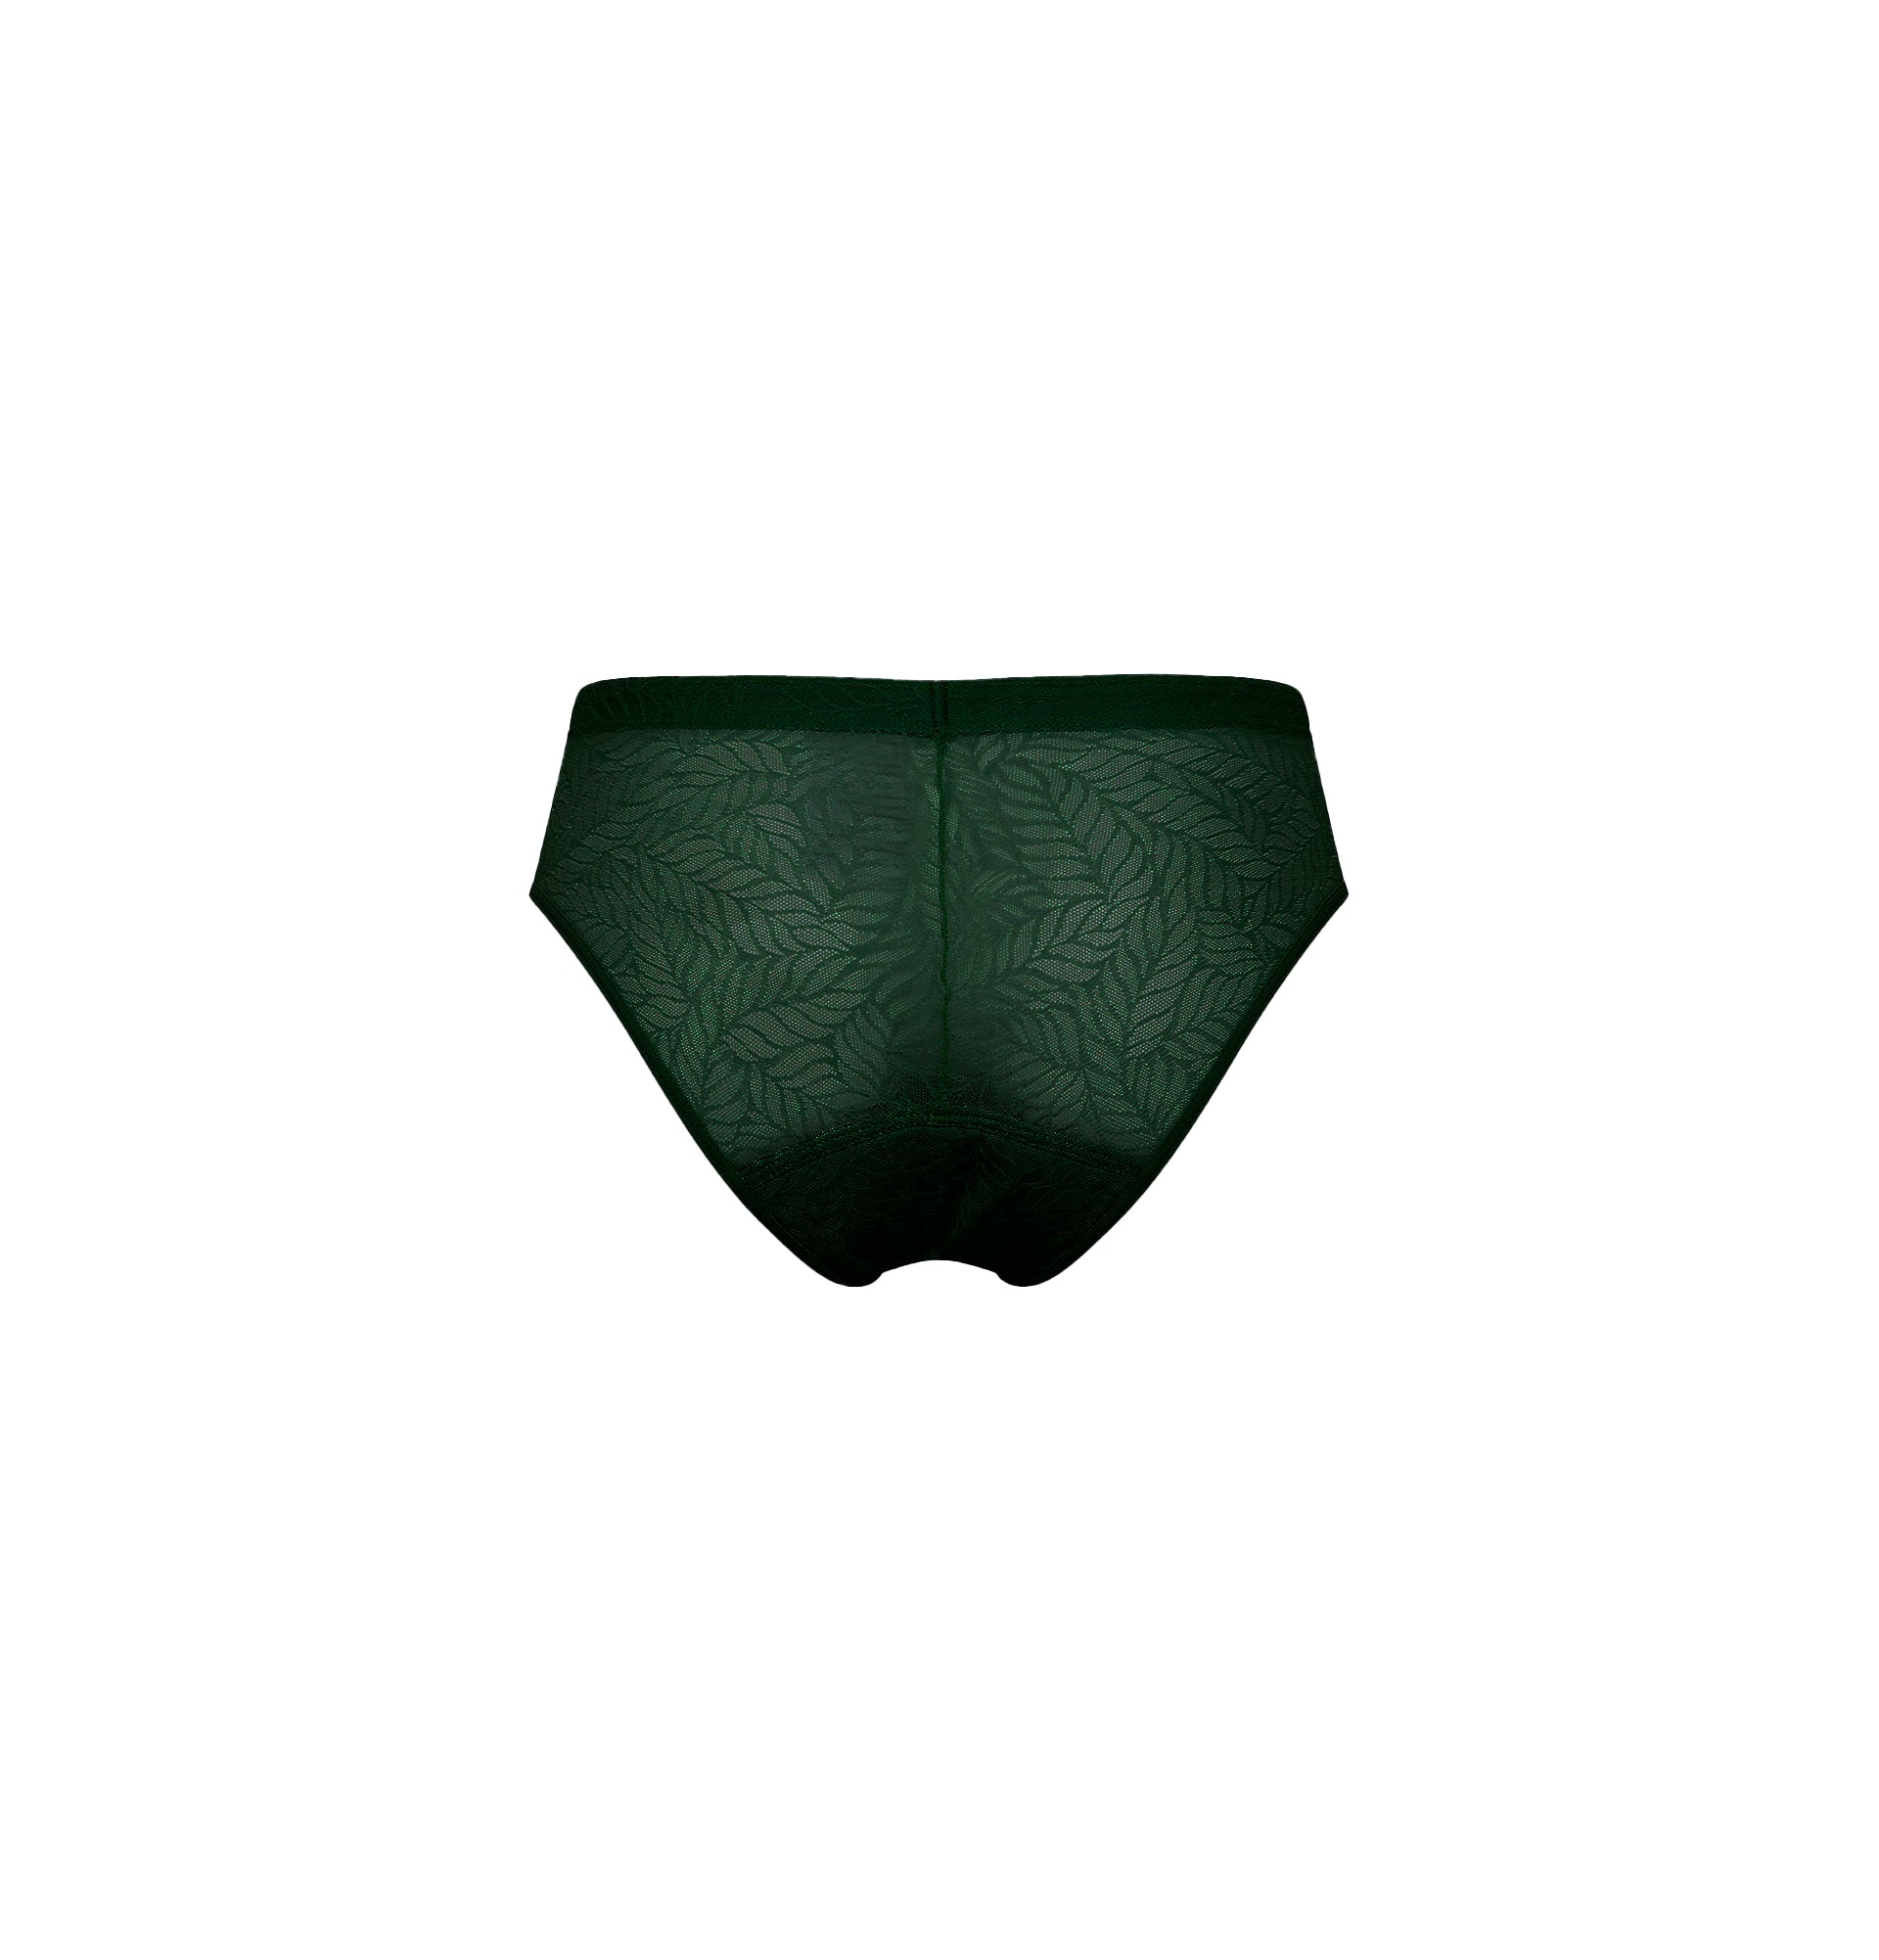 Eco-sustainable lace menstrual briefs